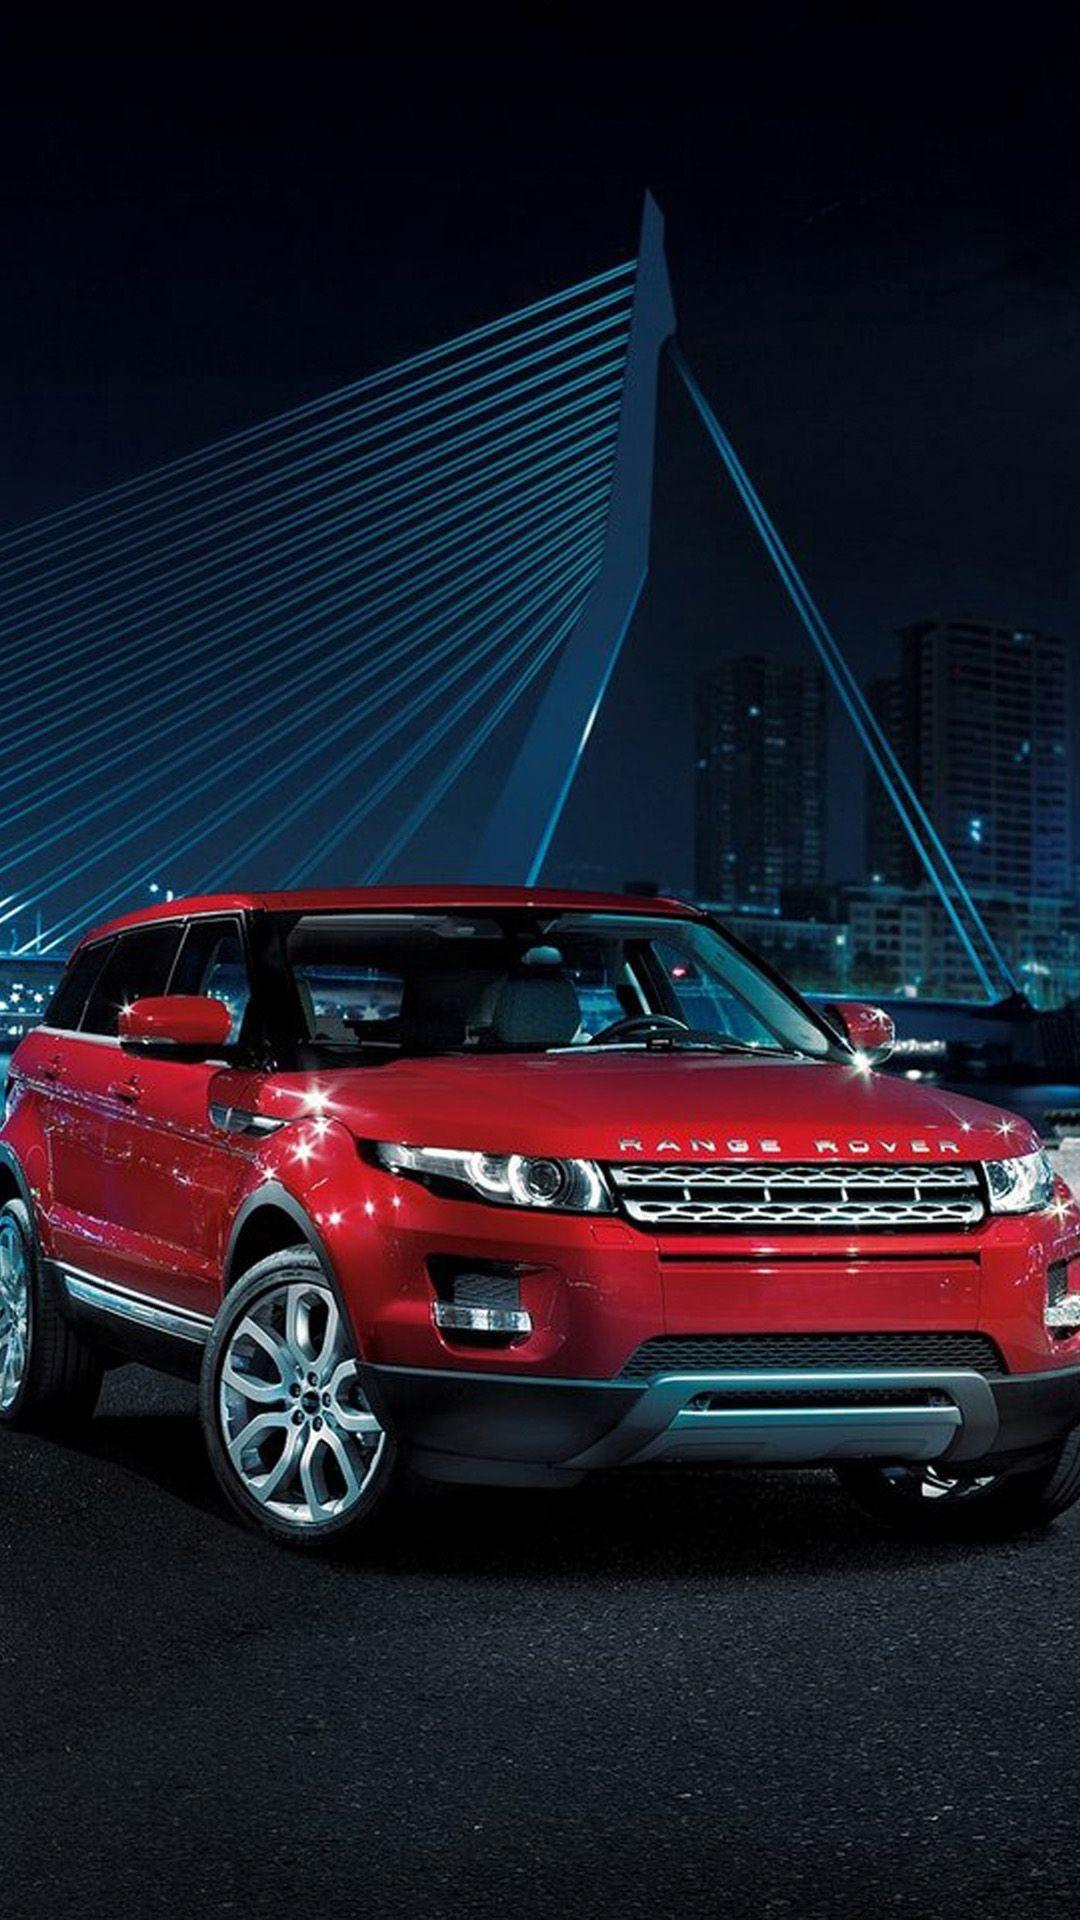 Red Range Rover Wallpapers - Wallpaper Cave